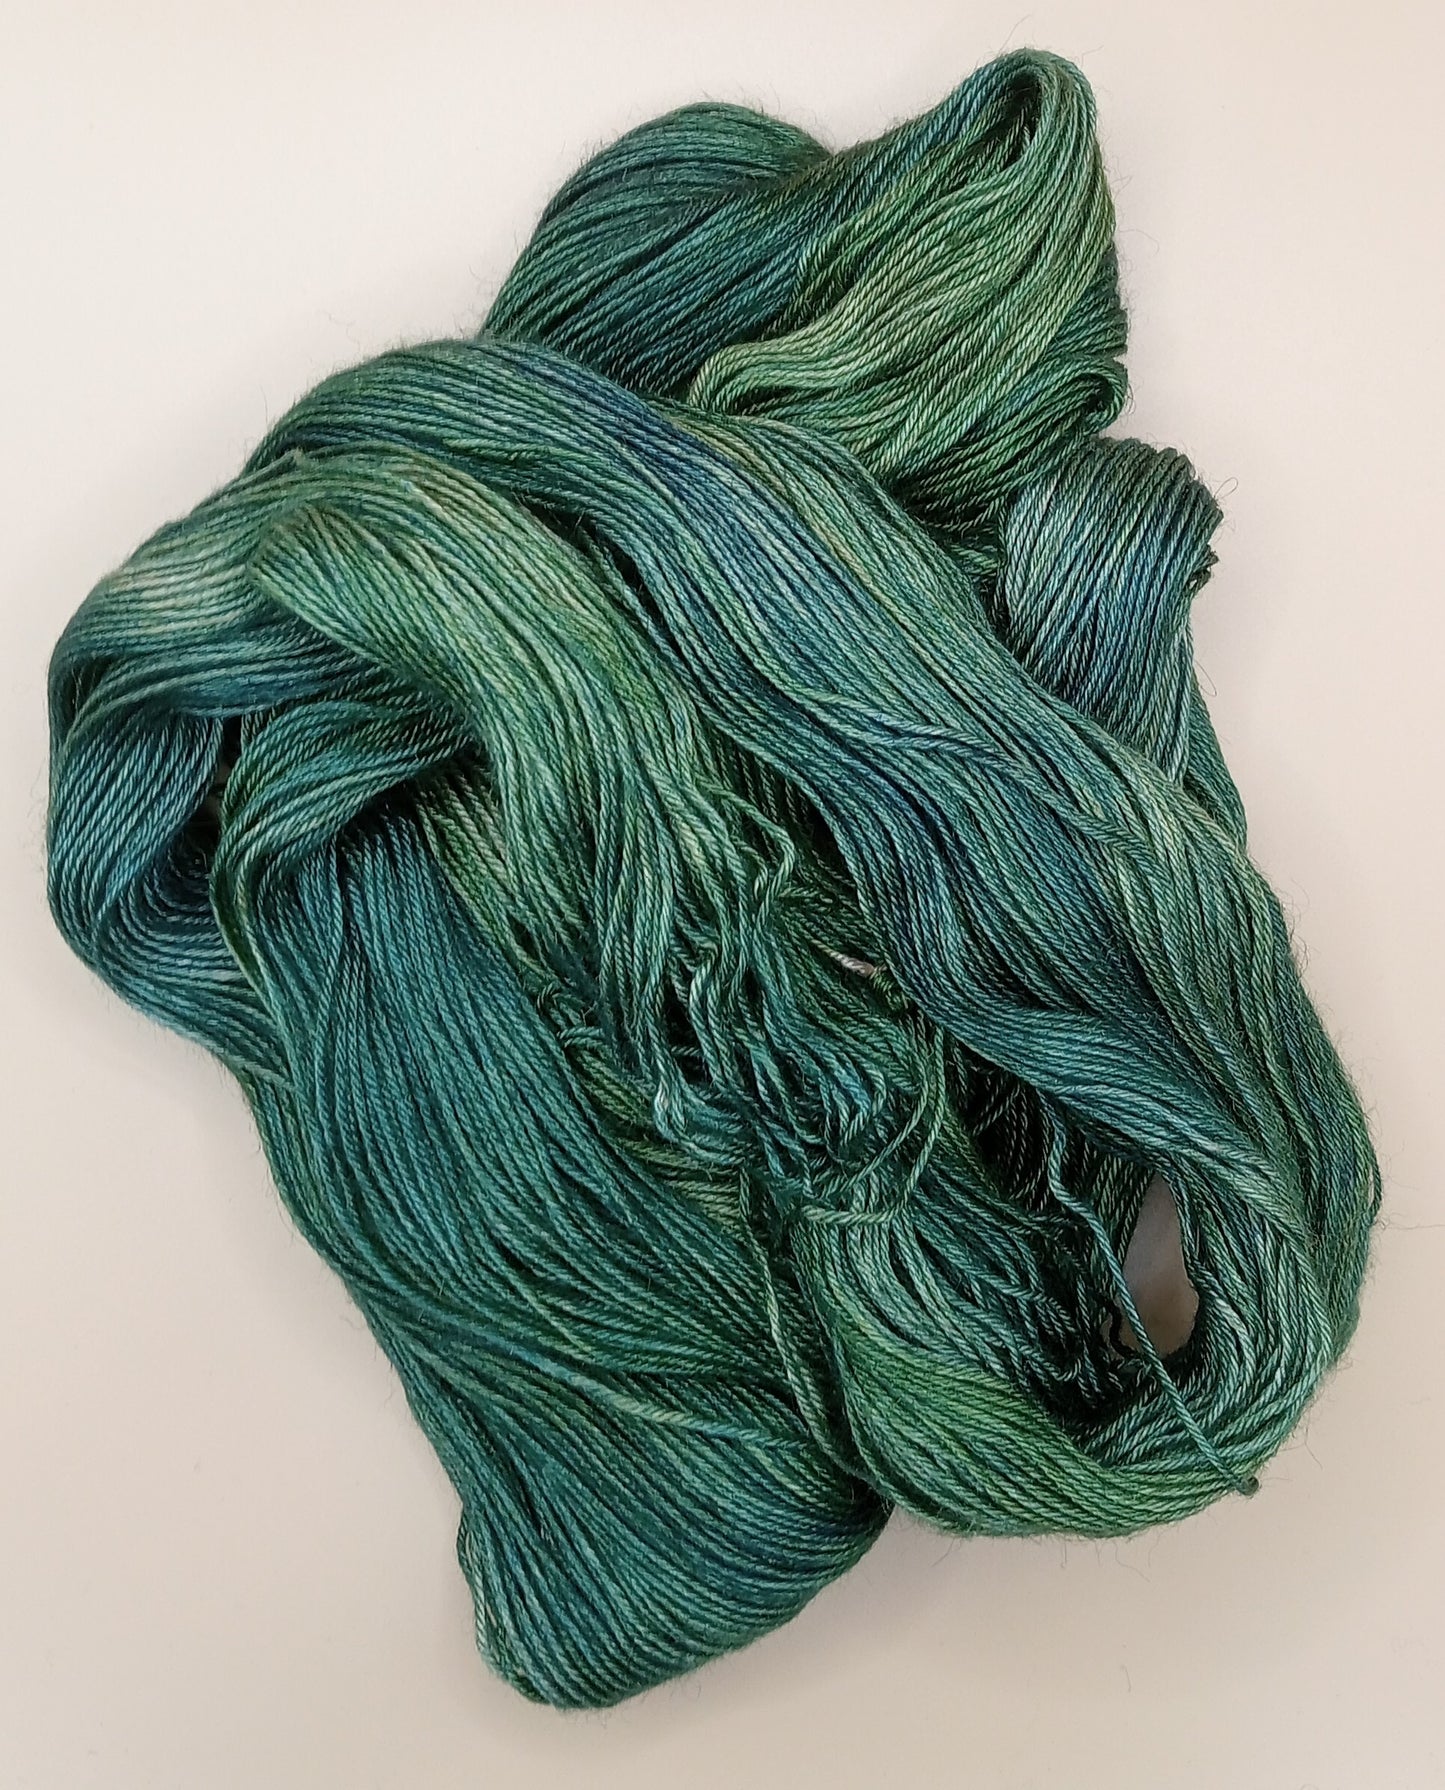 100G Bluefaced Leicester hand dyed 4 ply Yarn- "Emerald Forest" - **SALE**